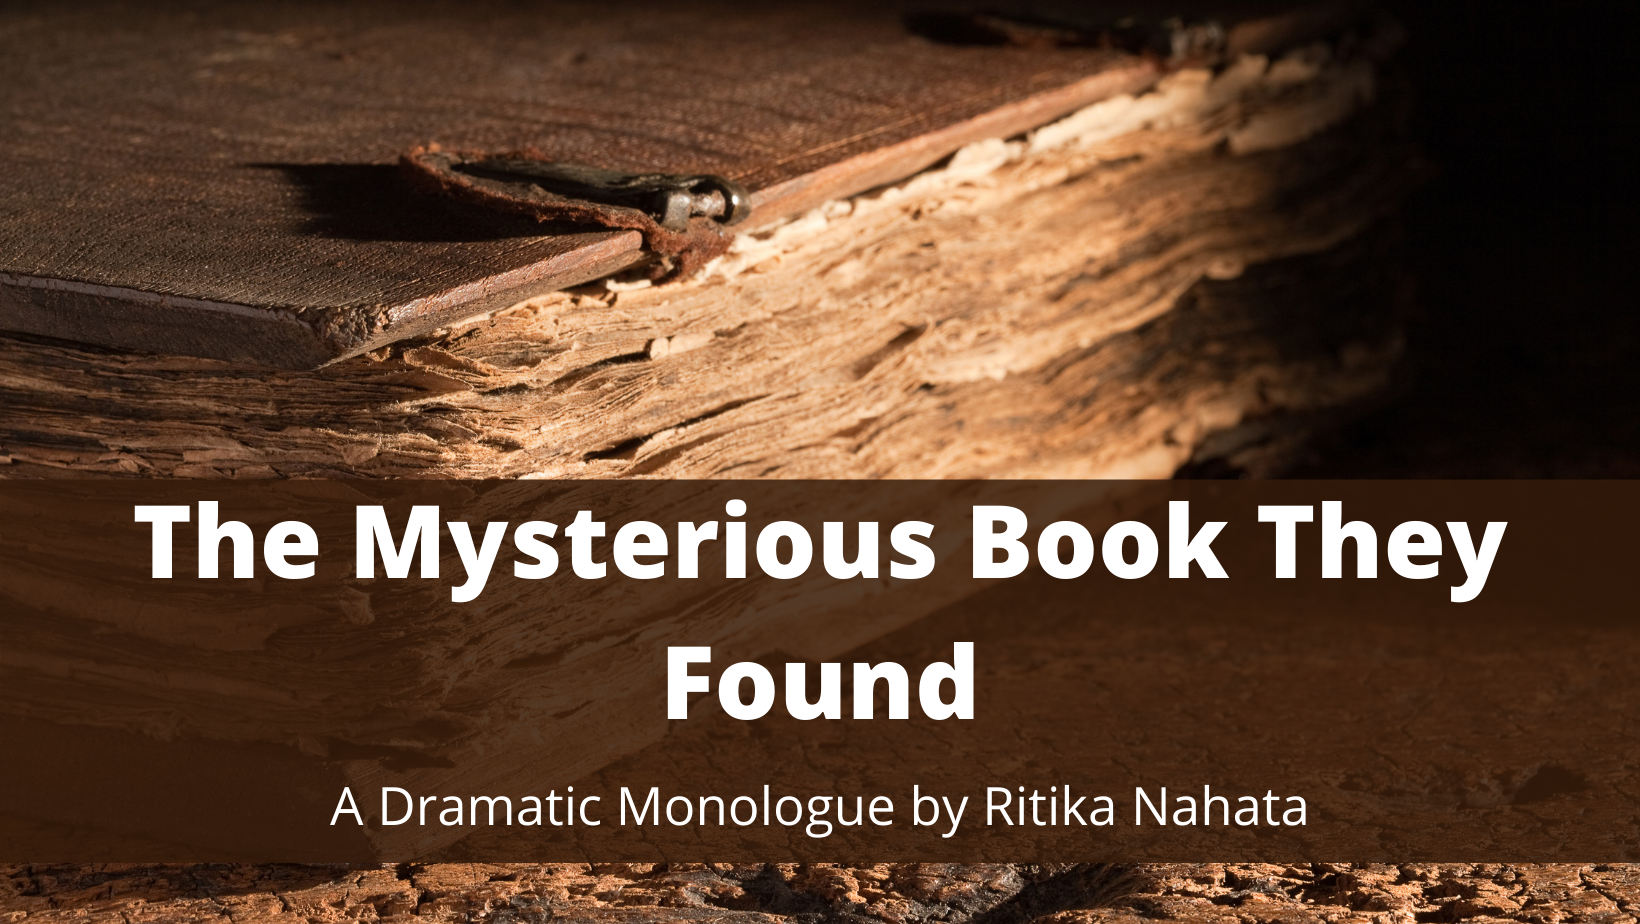 The Mysterious Book They Found - A Dramatic Monologue by Ritika Nahata